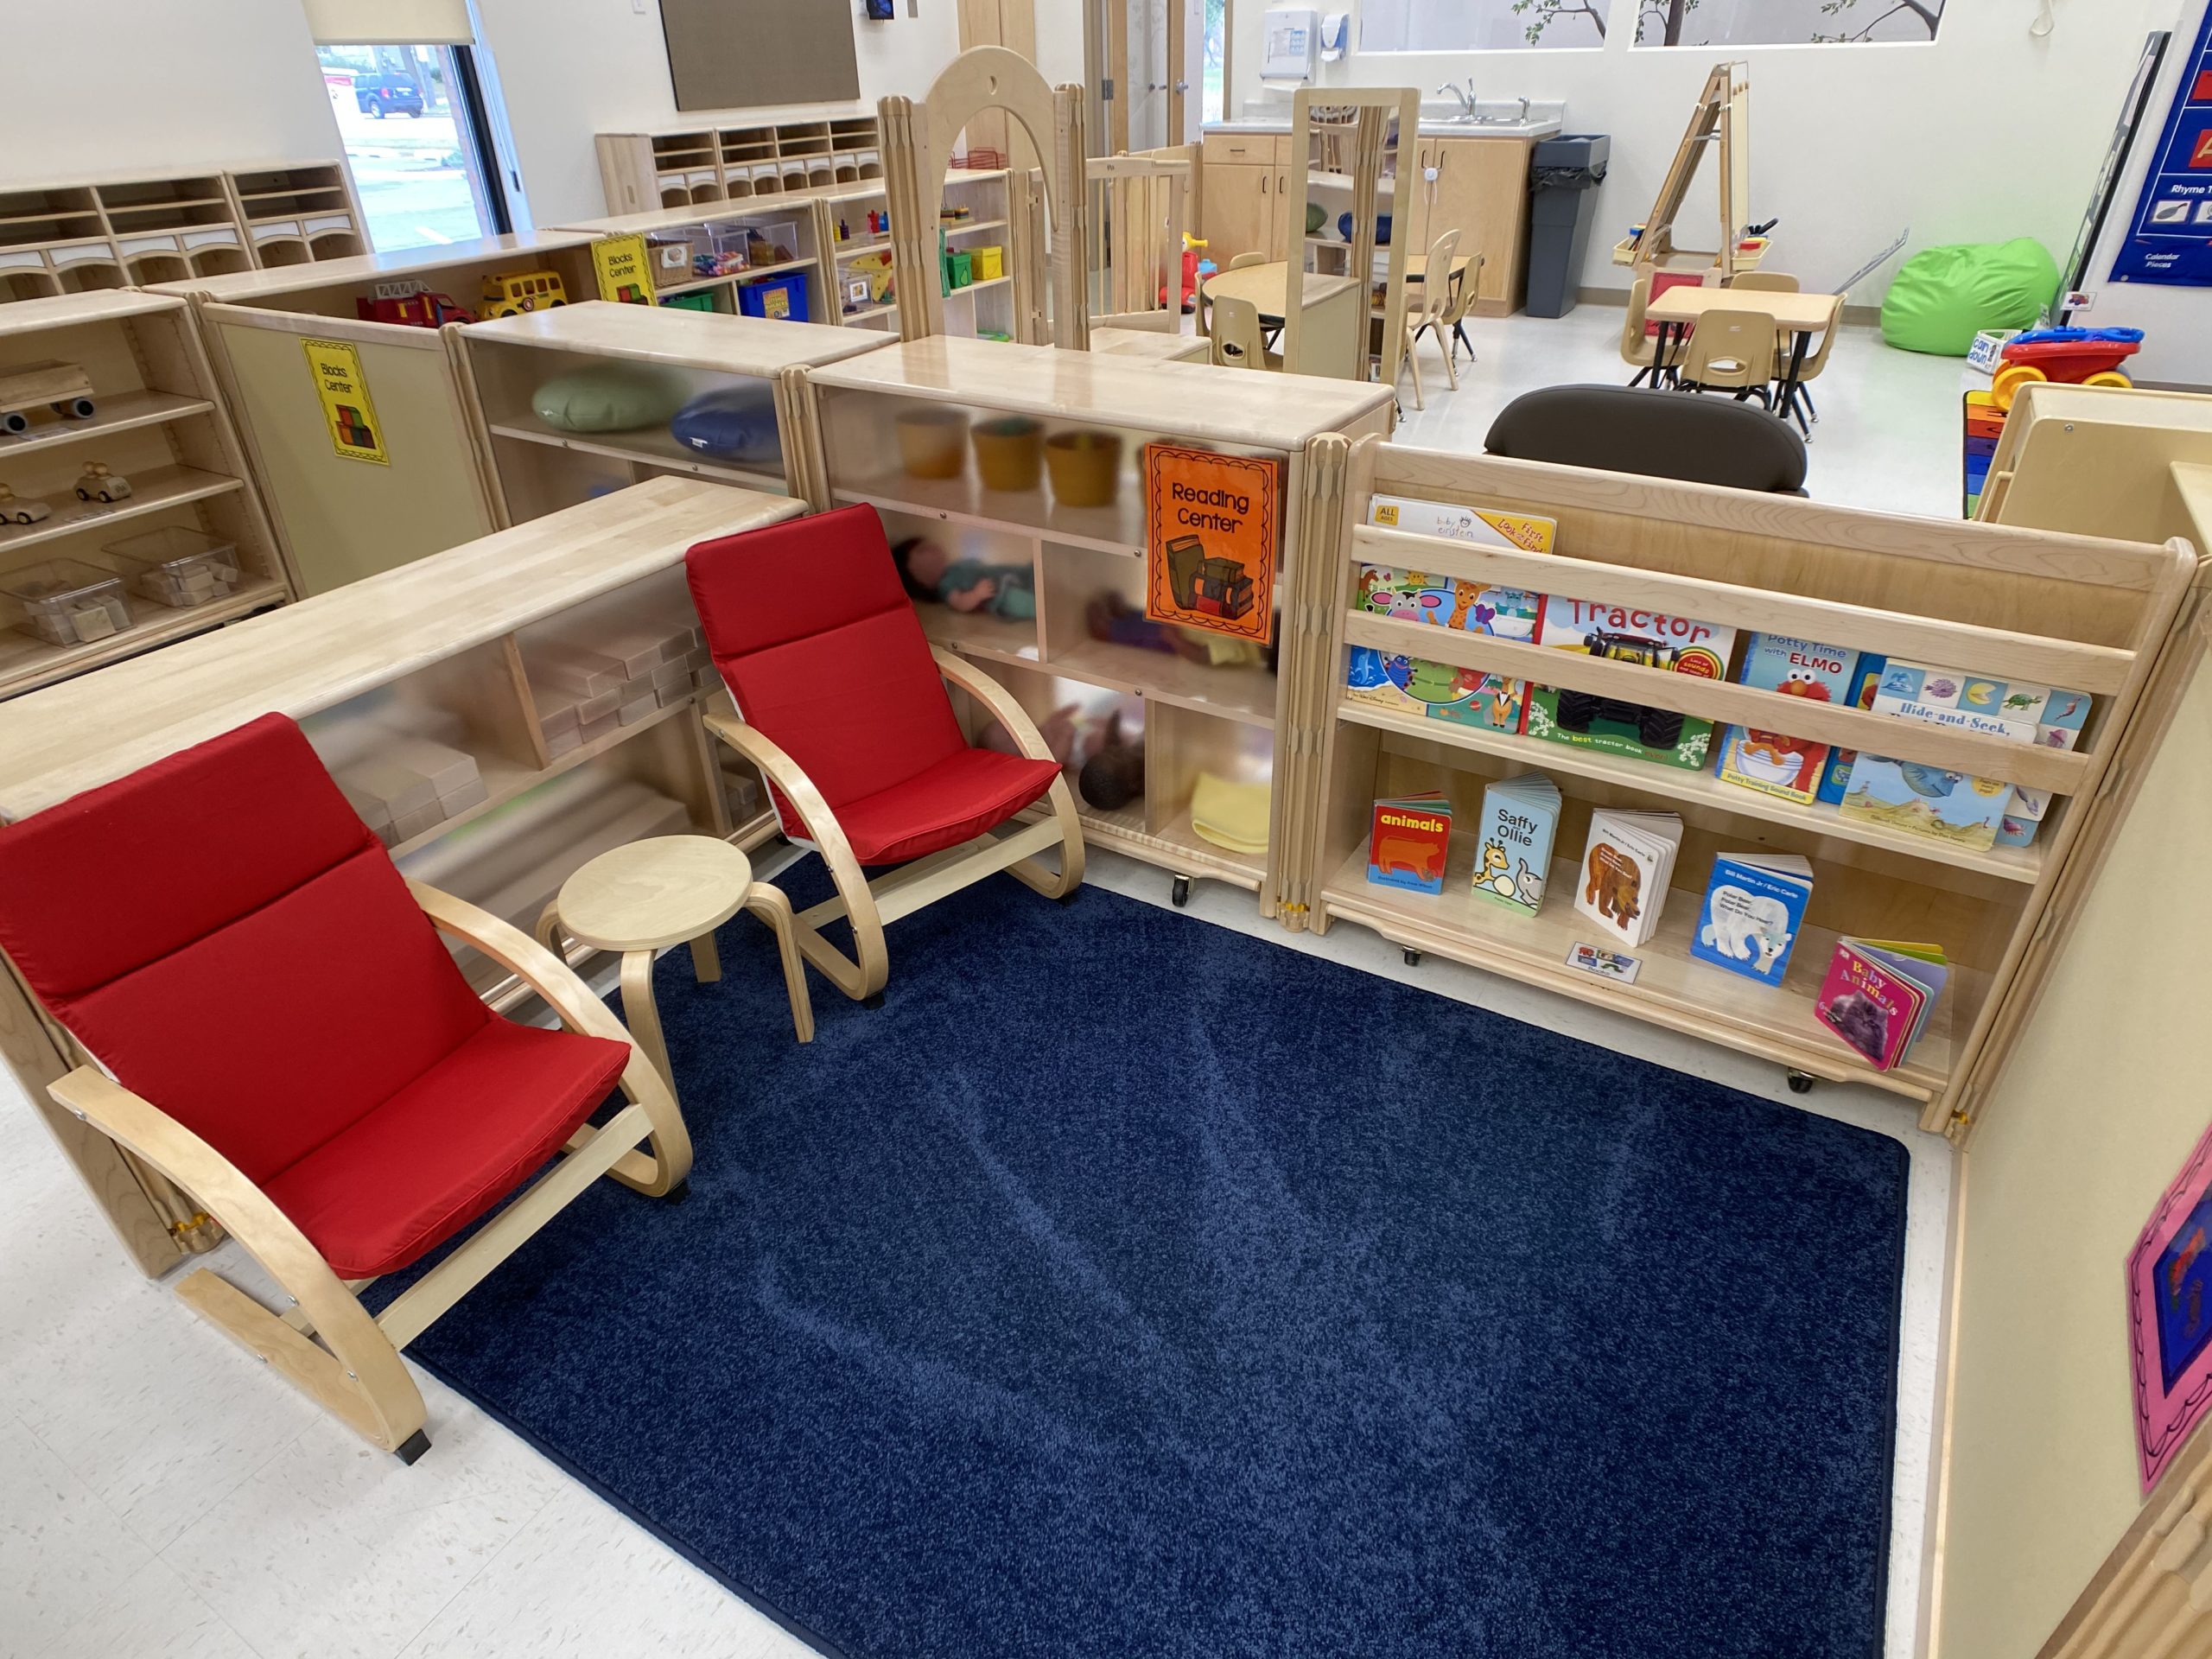 children's learning area - reading area with chairs